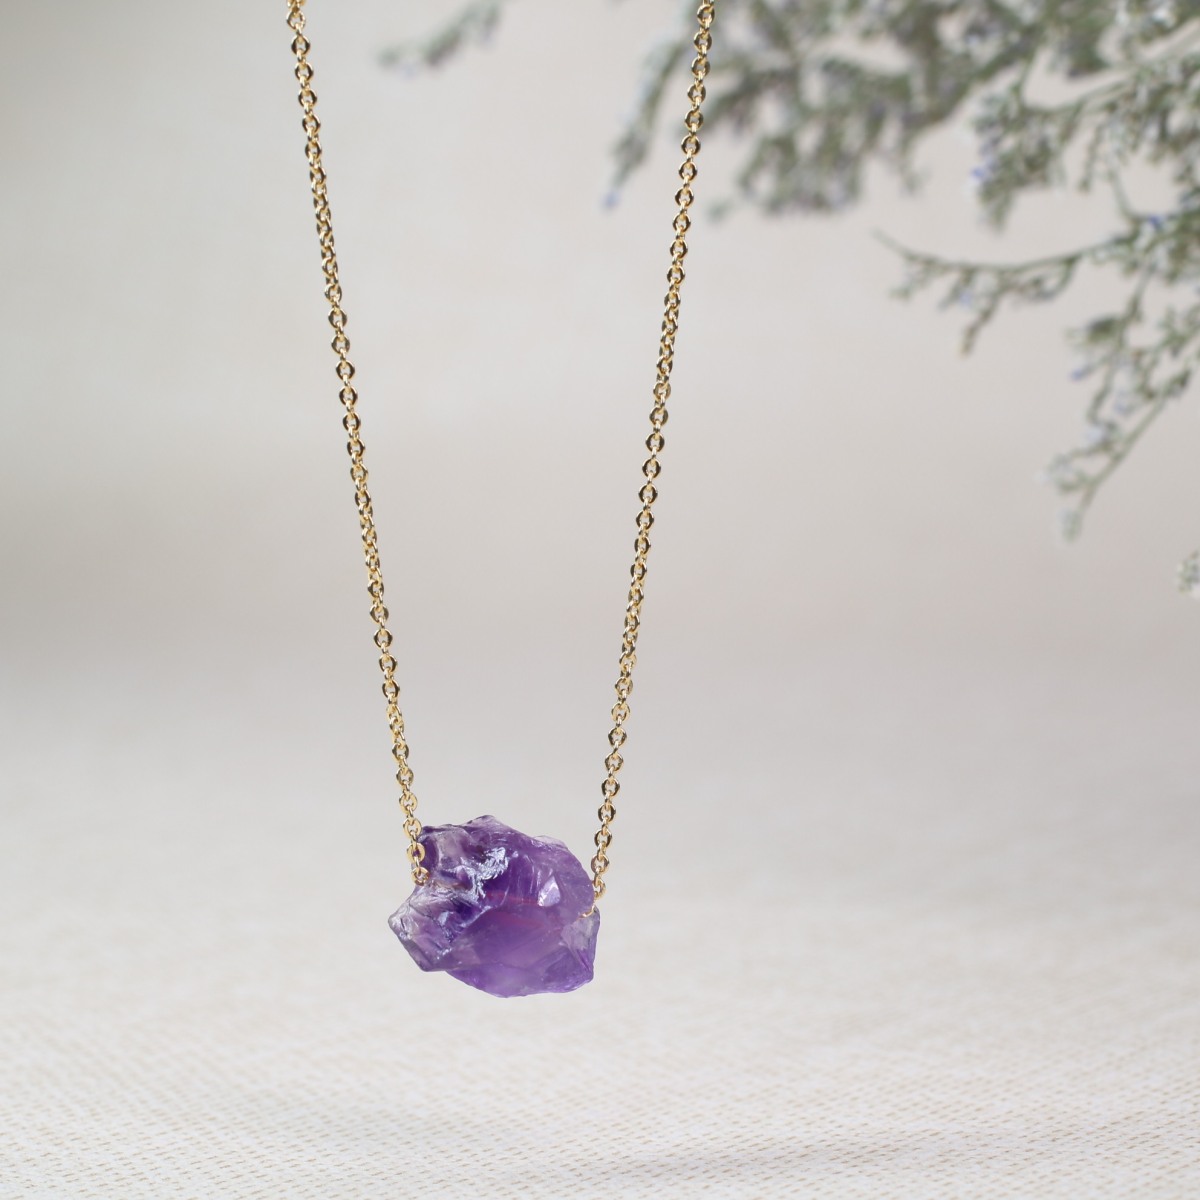 Coai Raw Amethyst Crystal Pendant Necklace For Women